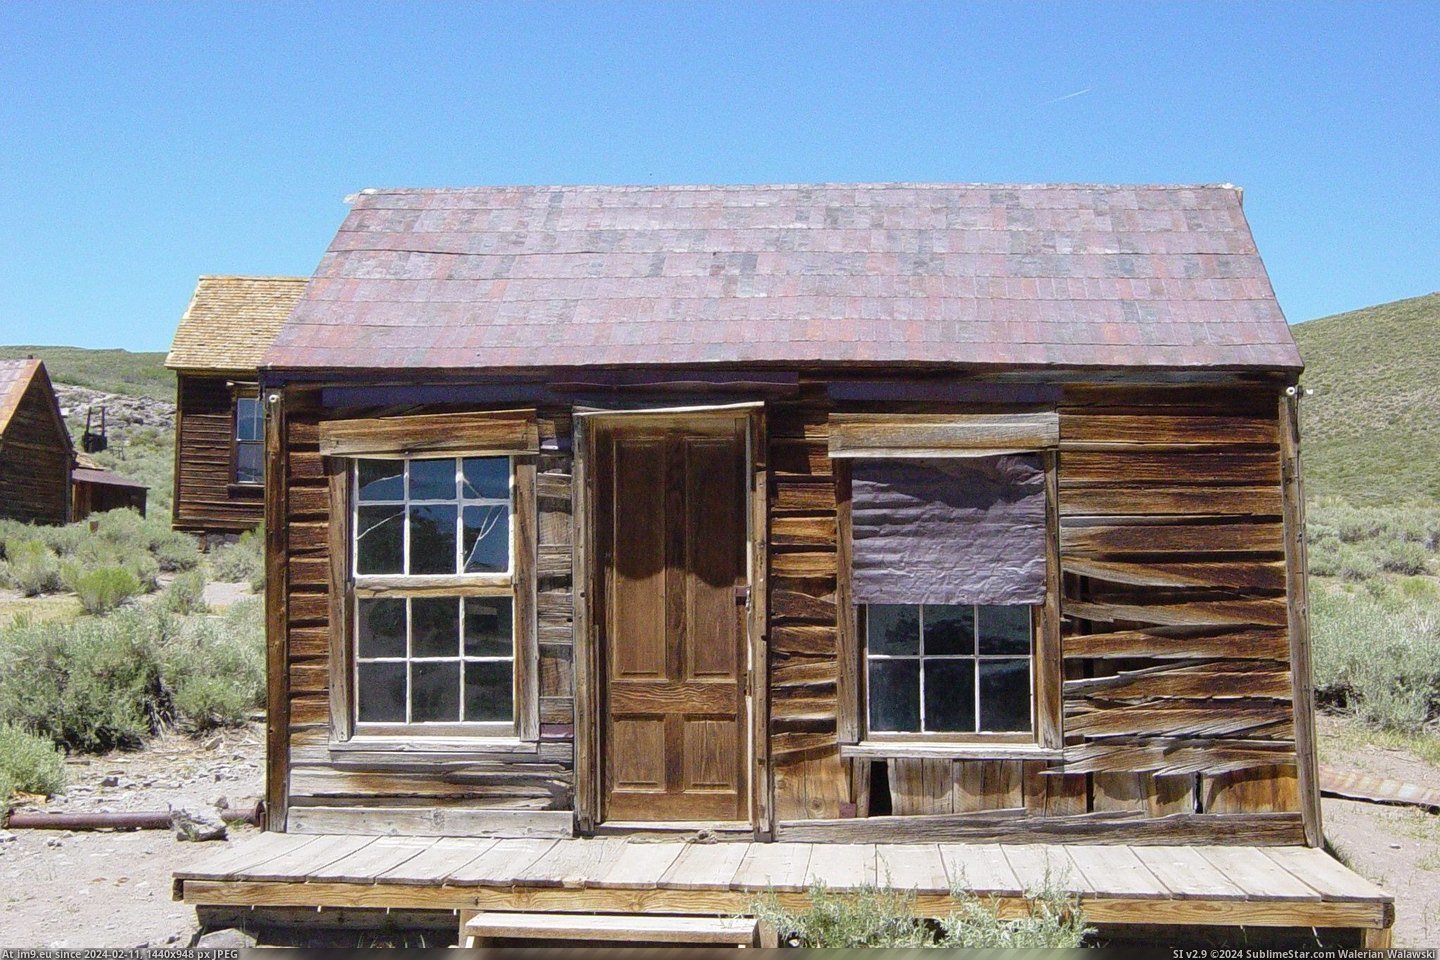 #California #House #Moyle #North #Bodie Moyle House North In Bodie, California Pic. (Изображение из альбом Bodie - a ghost town in Eastern California))